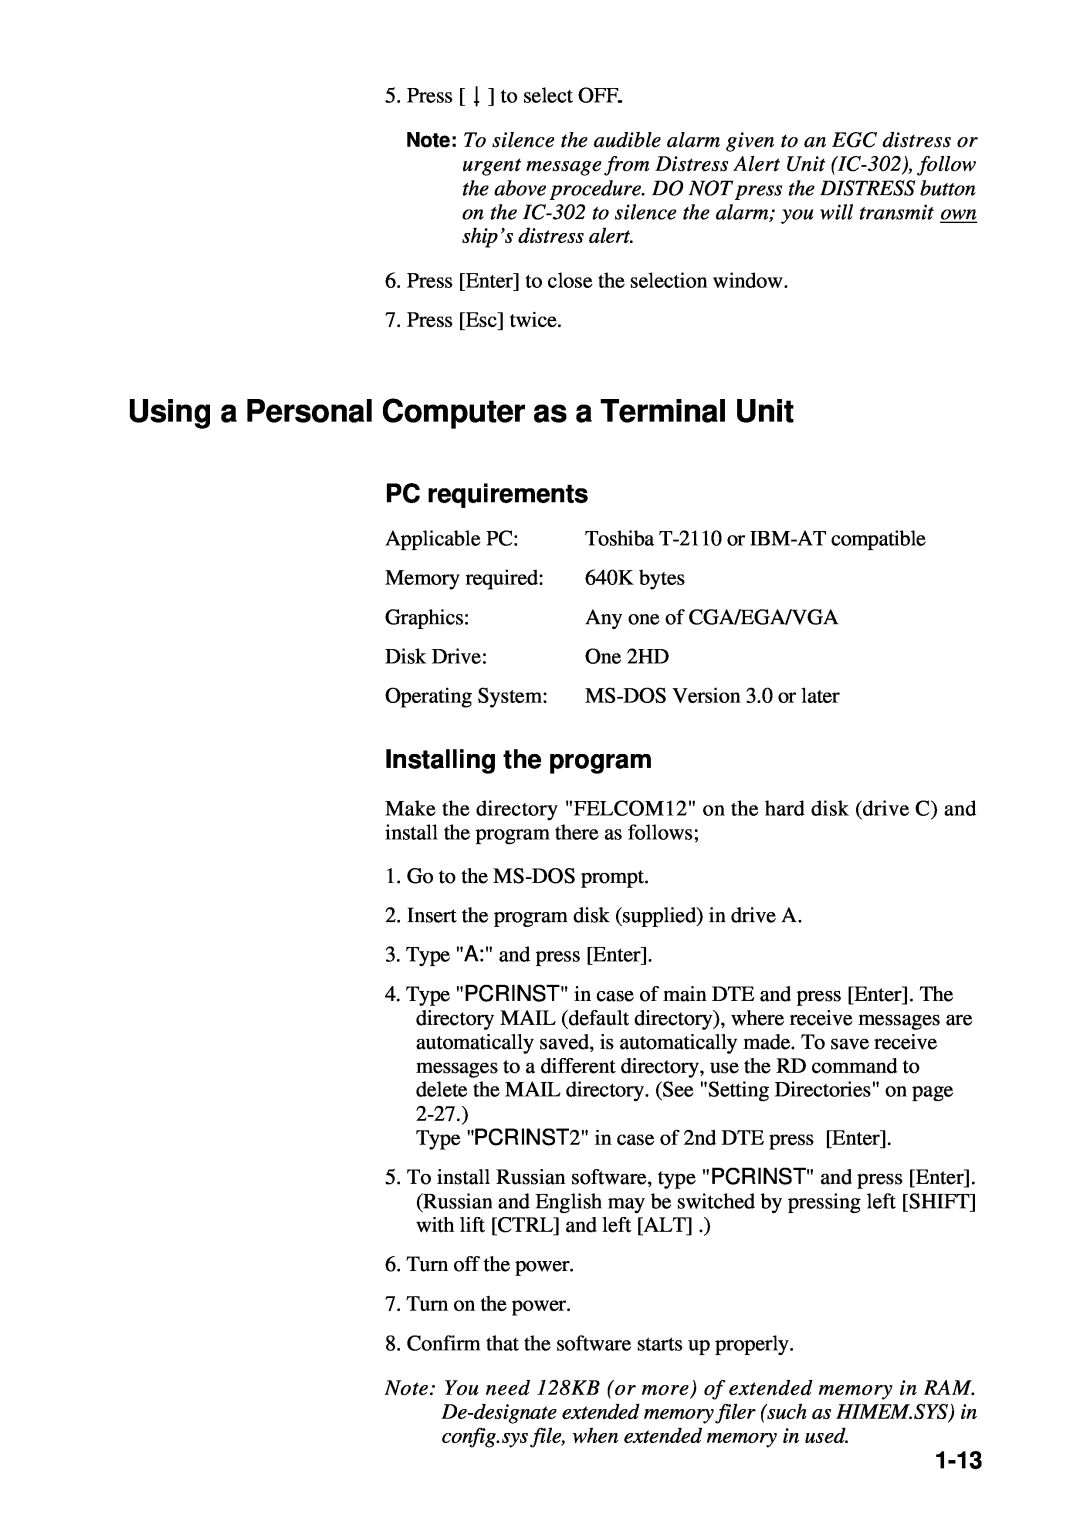 Furuno RC-1500-1T manual Using a Personal Computer as a Terminal Unit, PC requirements, Installing the program, 1-13 